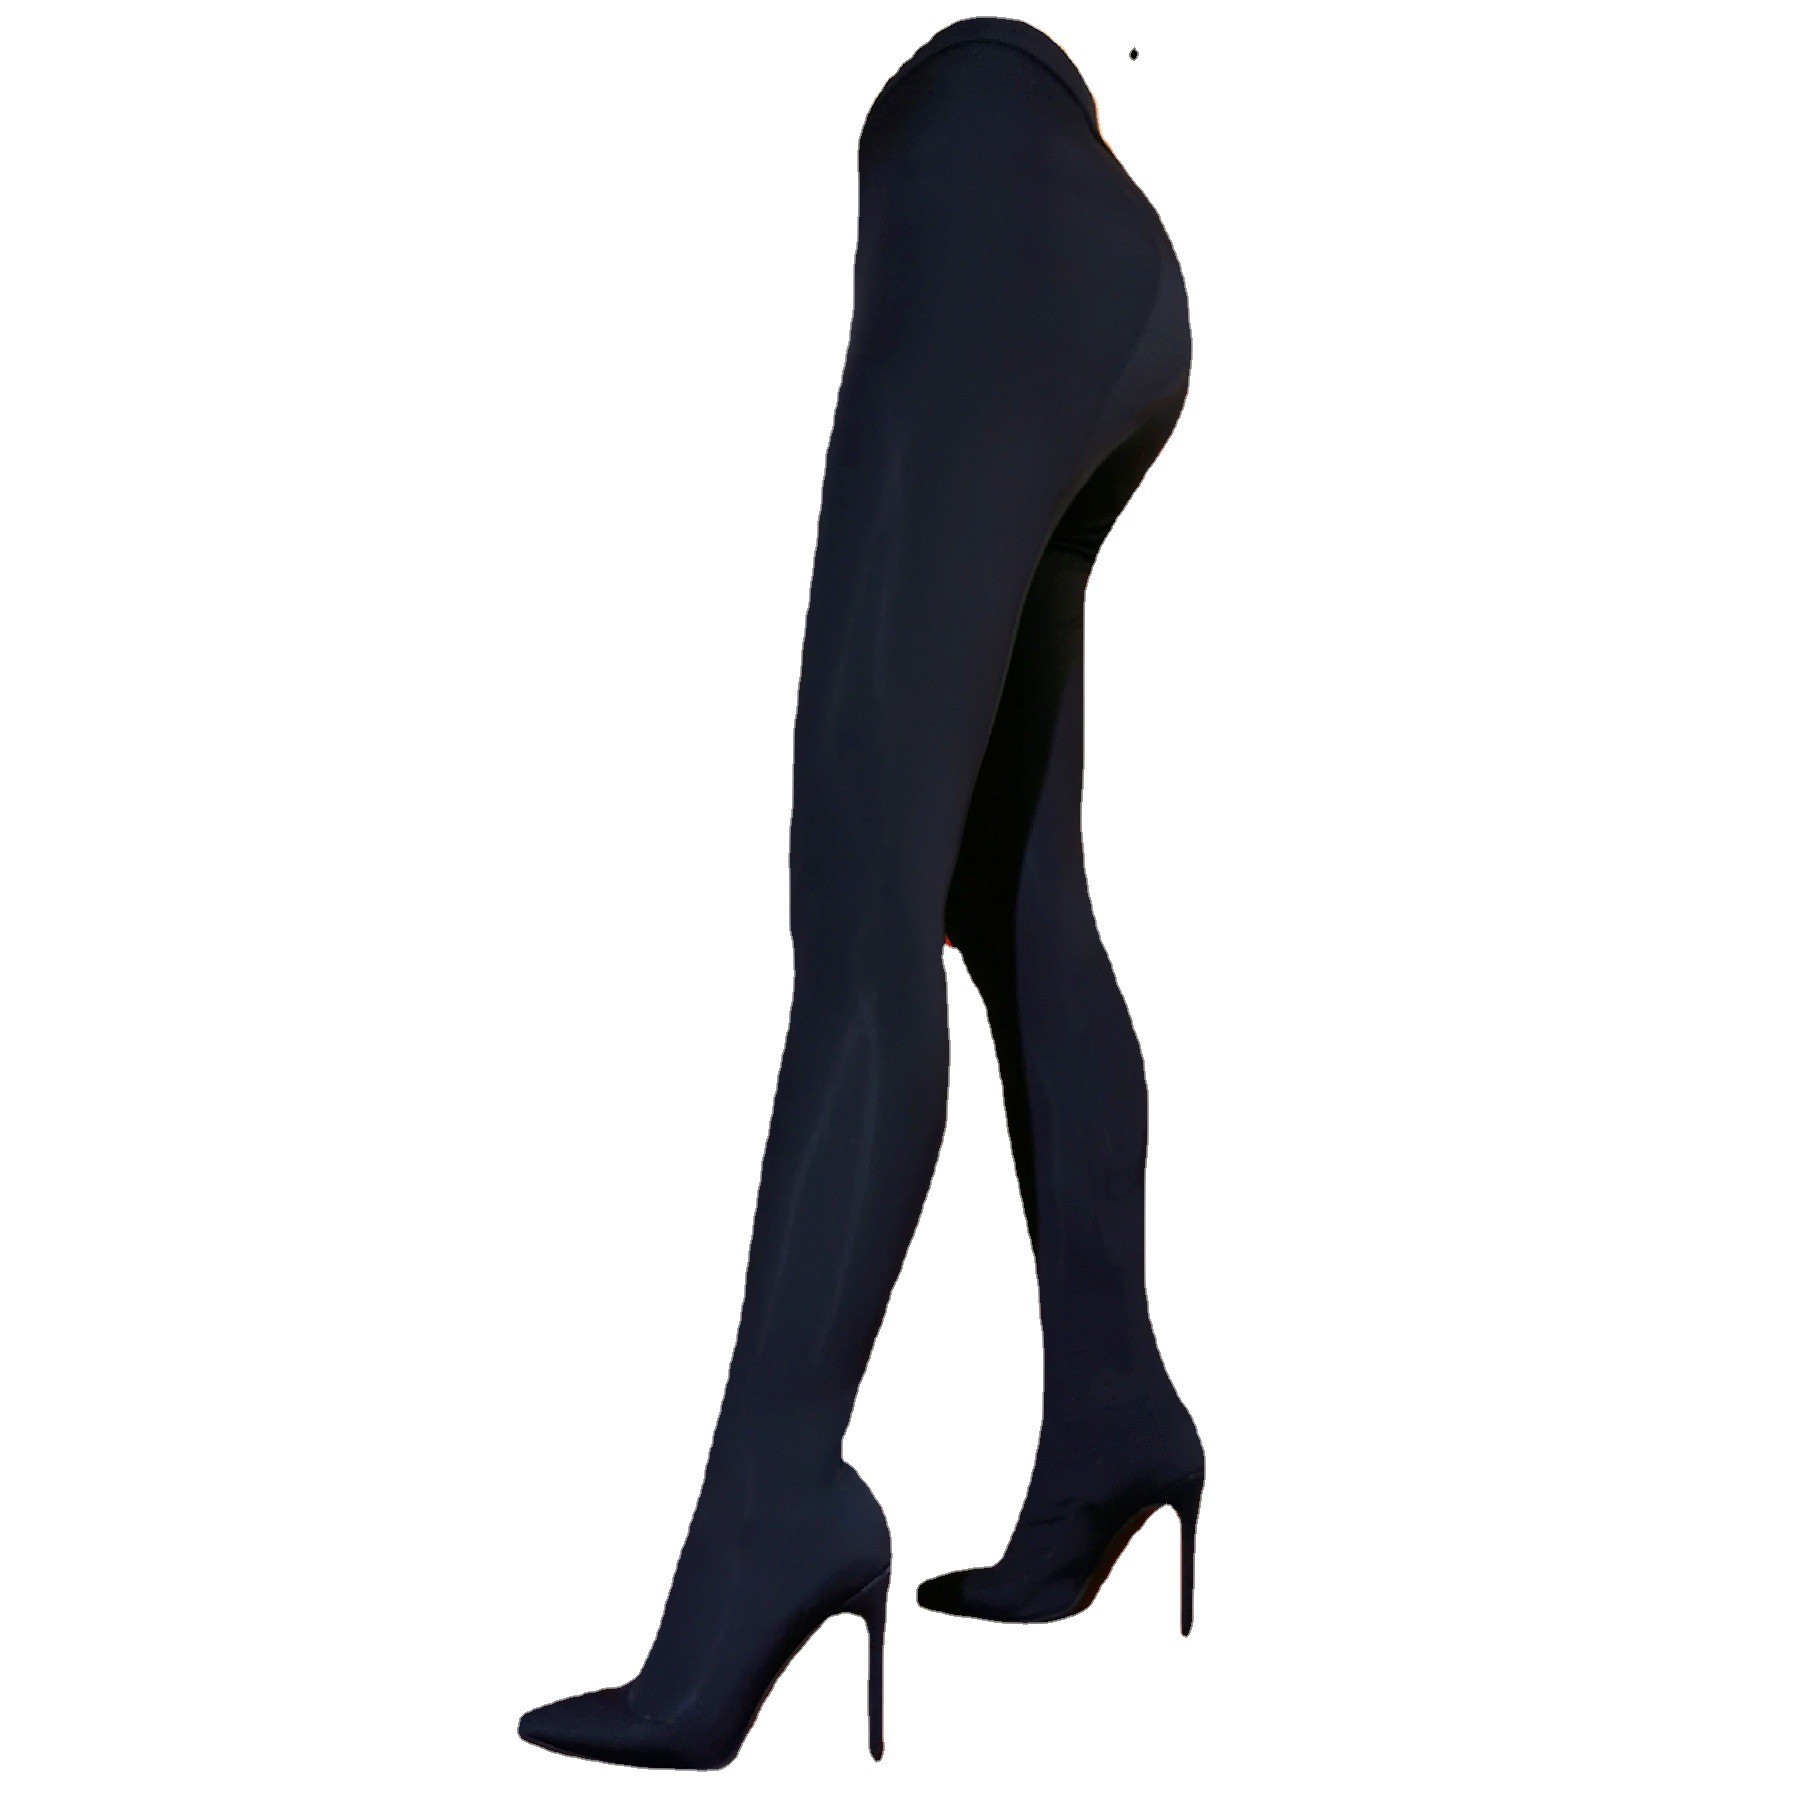 TAAFO Wide Fit Stretch Women's Pants Boots Thigh High Stiletto Thin Heels Trousers Booties Ladies Skintight Shoes